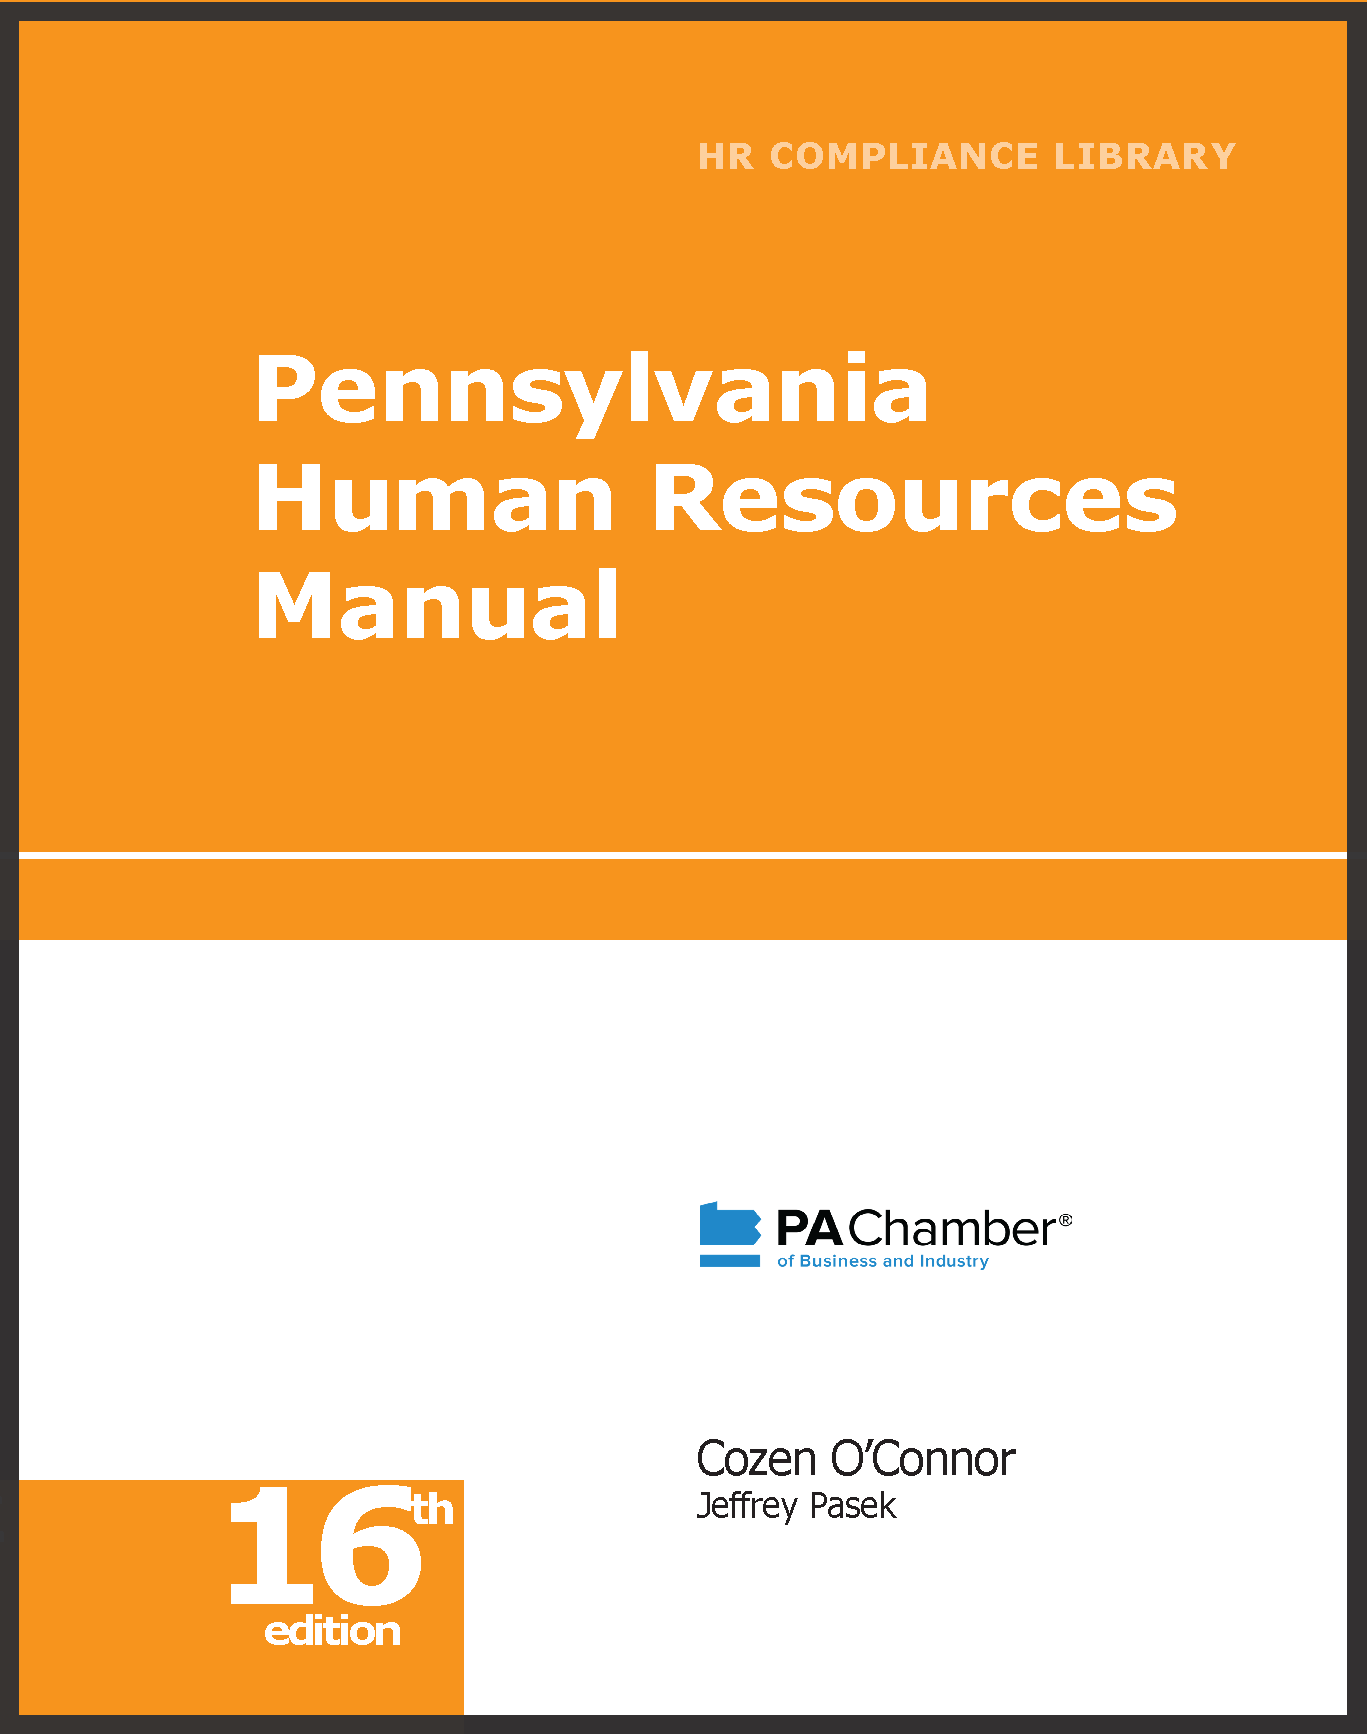 Pennsylvania Human Resources Library employment law image, remote work, labor laws, employment laws, right to work, order of protection, minimum wage